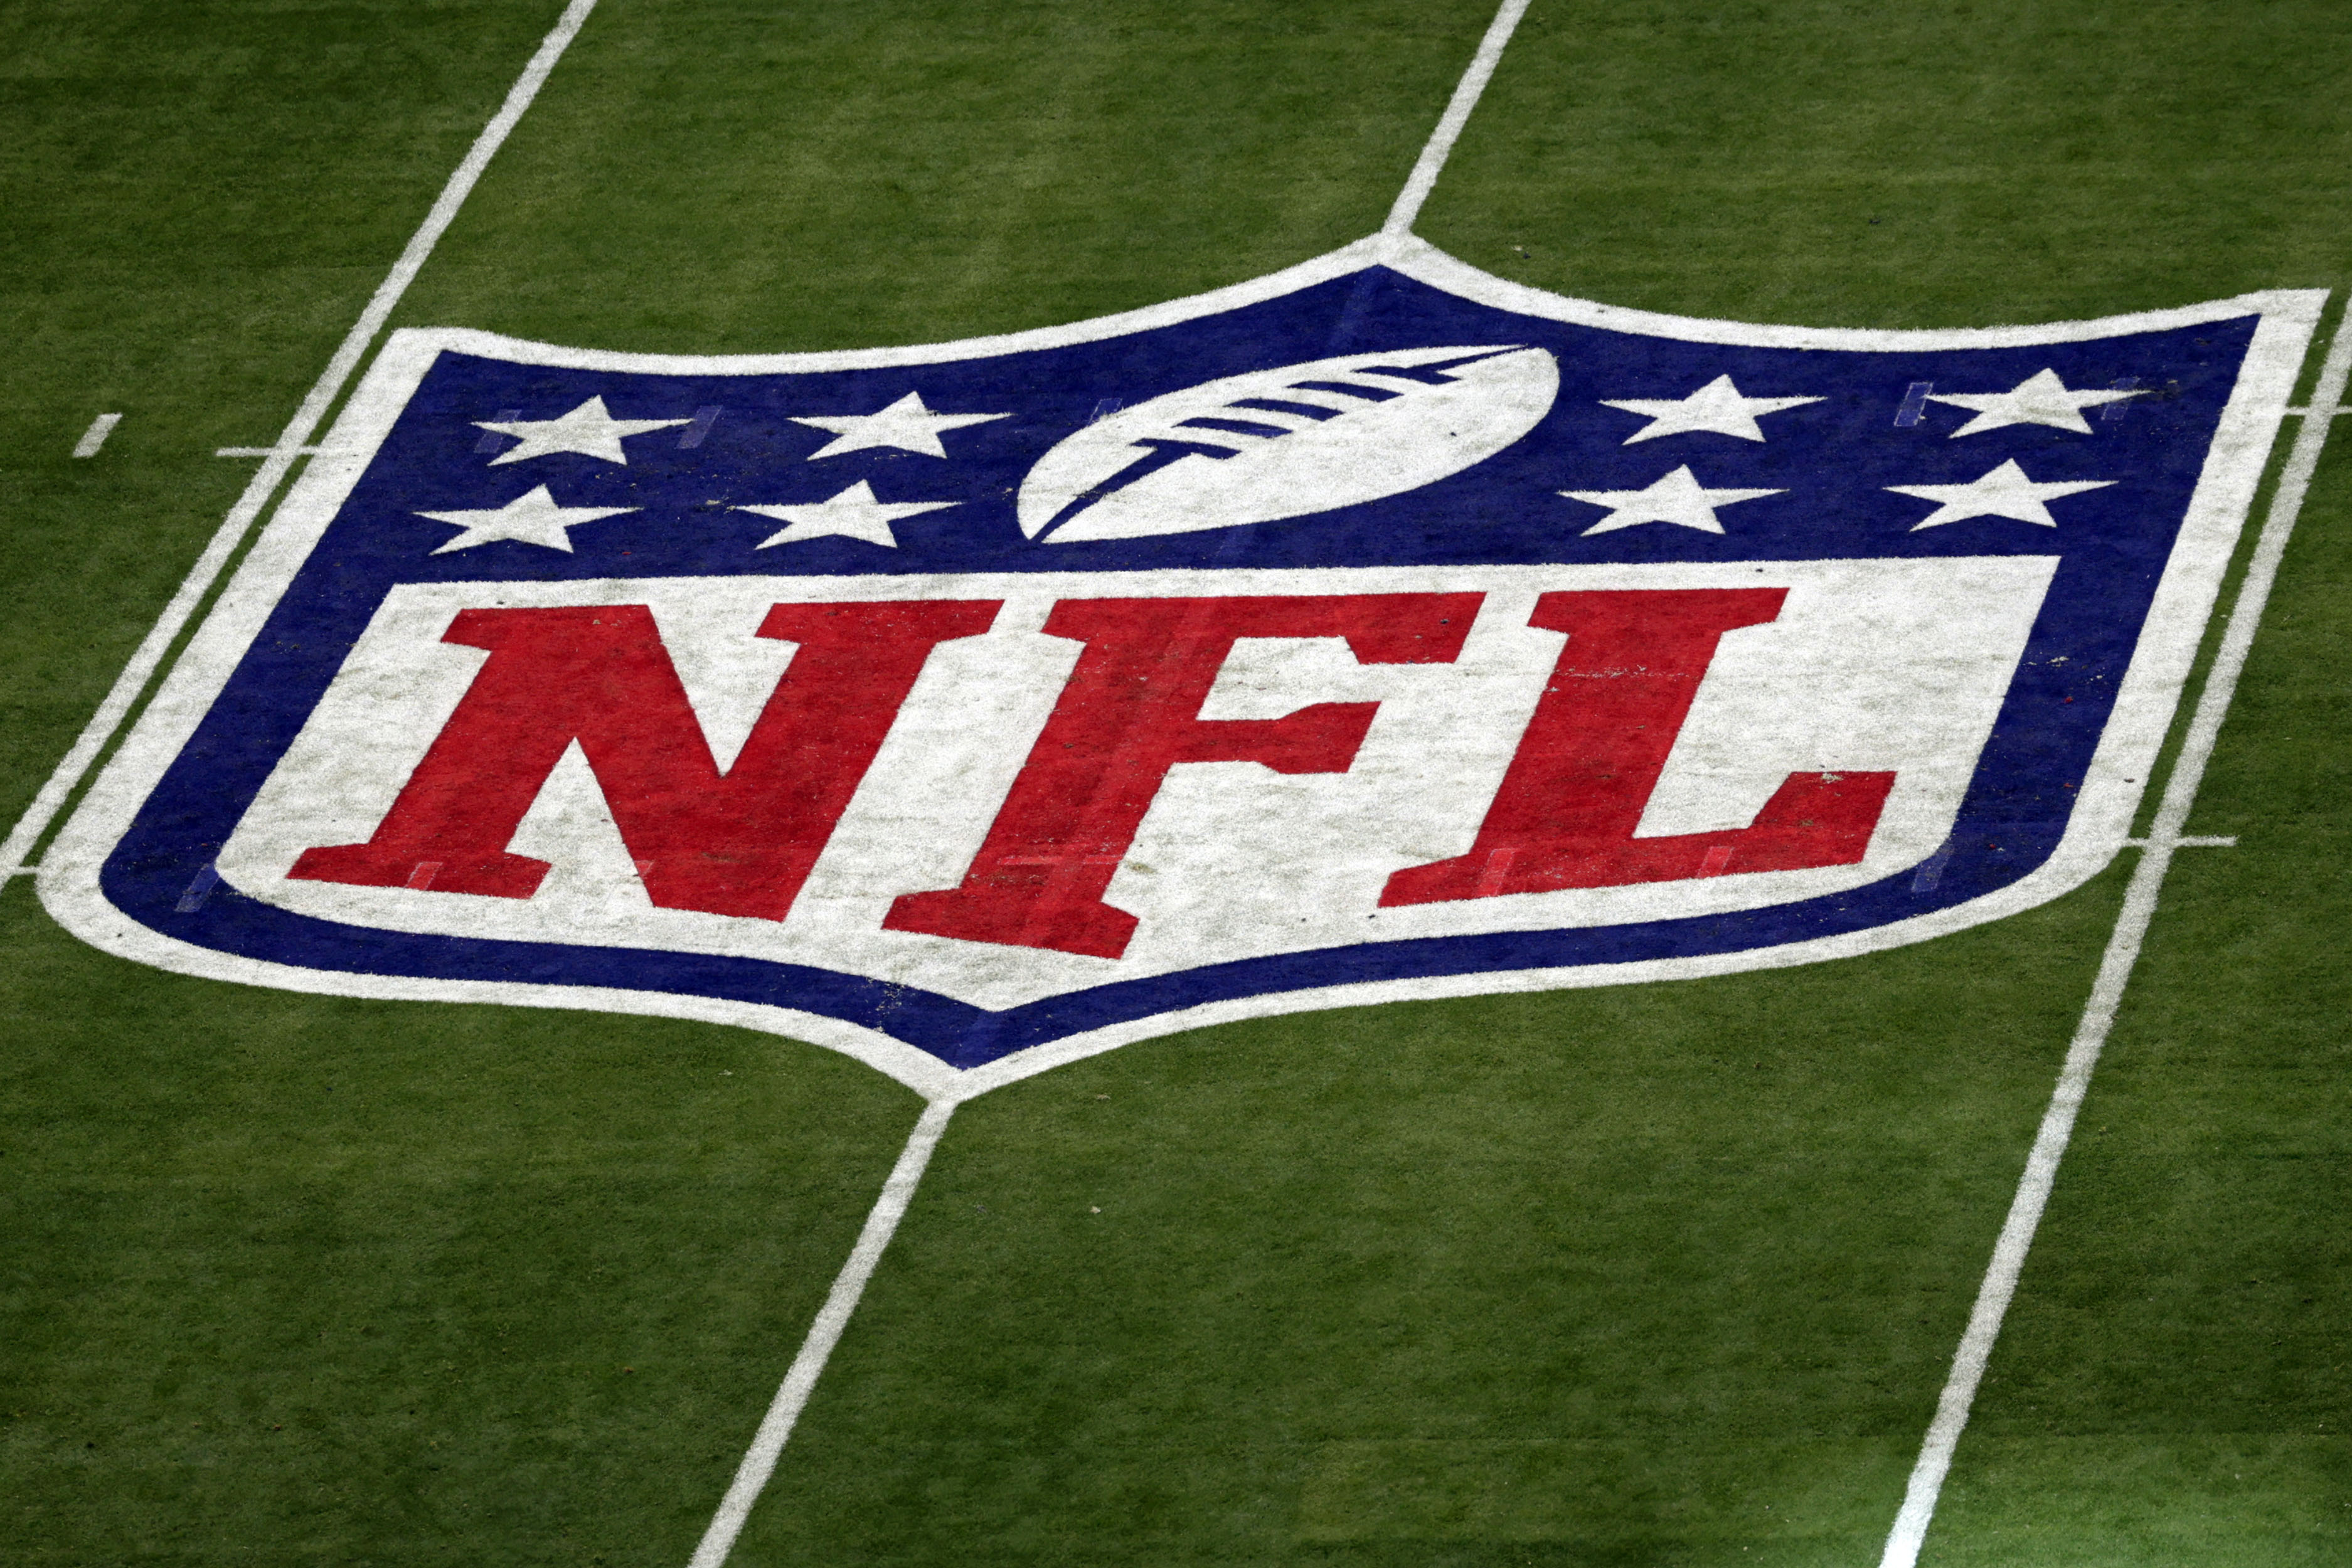 NFL Network and NFL RedZone will be offered direct to consumer on NFL+ service